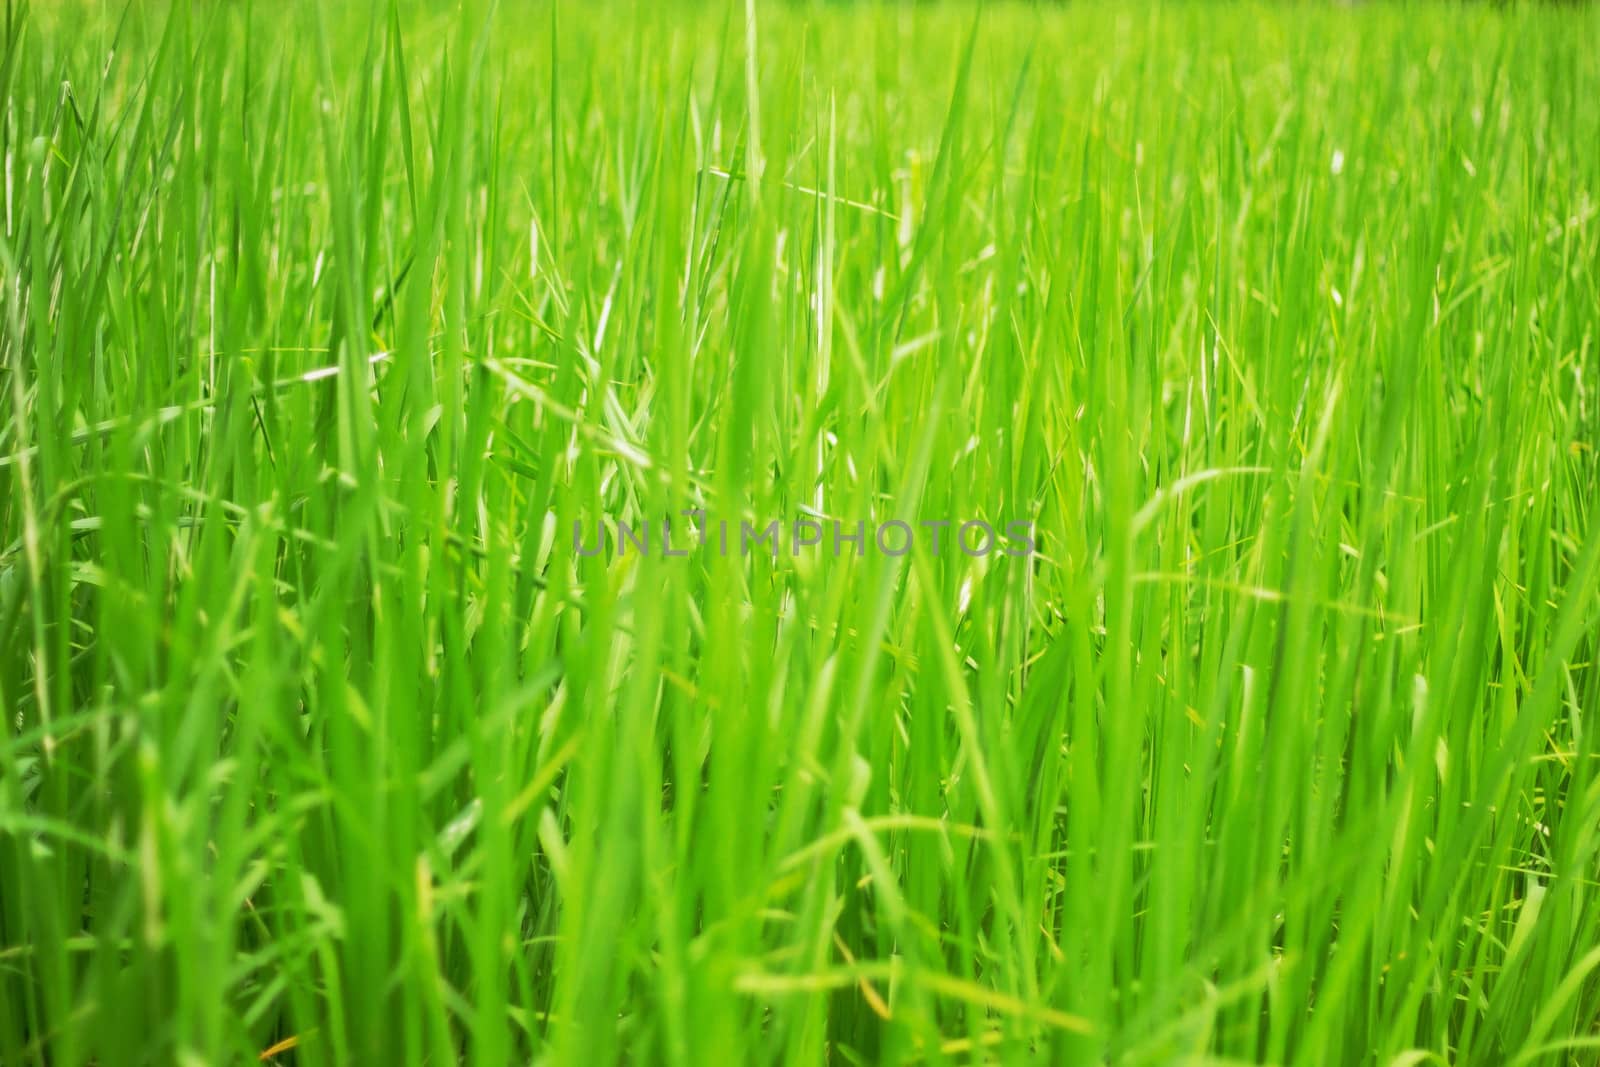 rice plants on the field with green background.